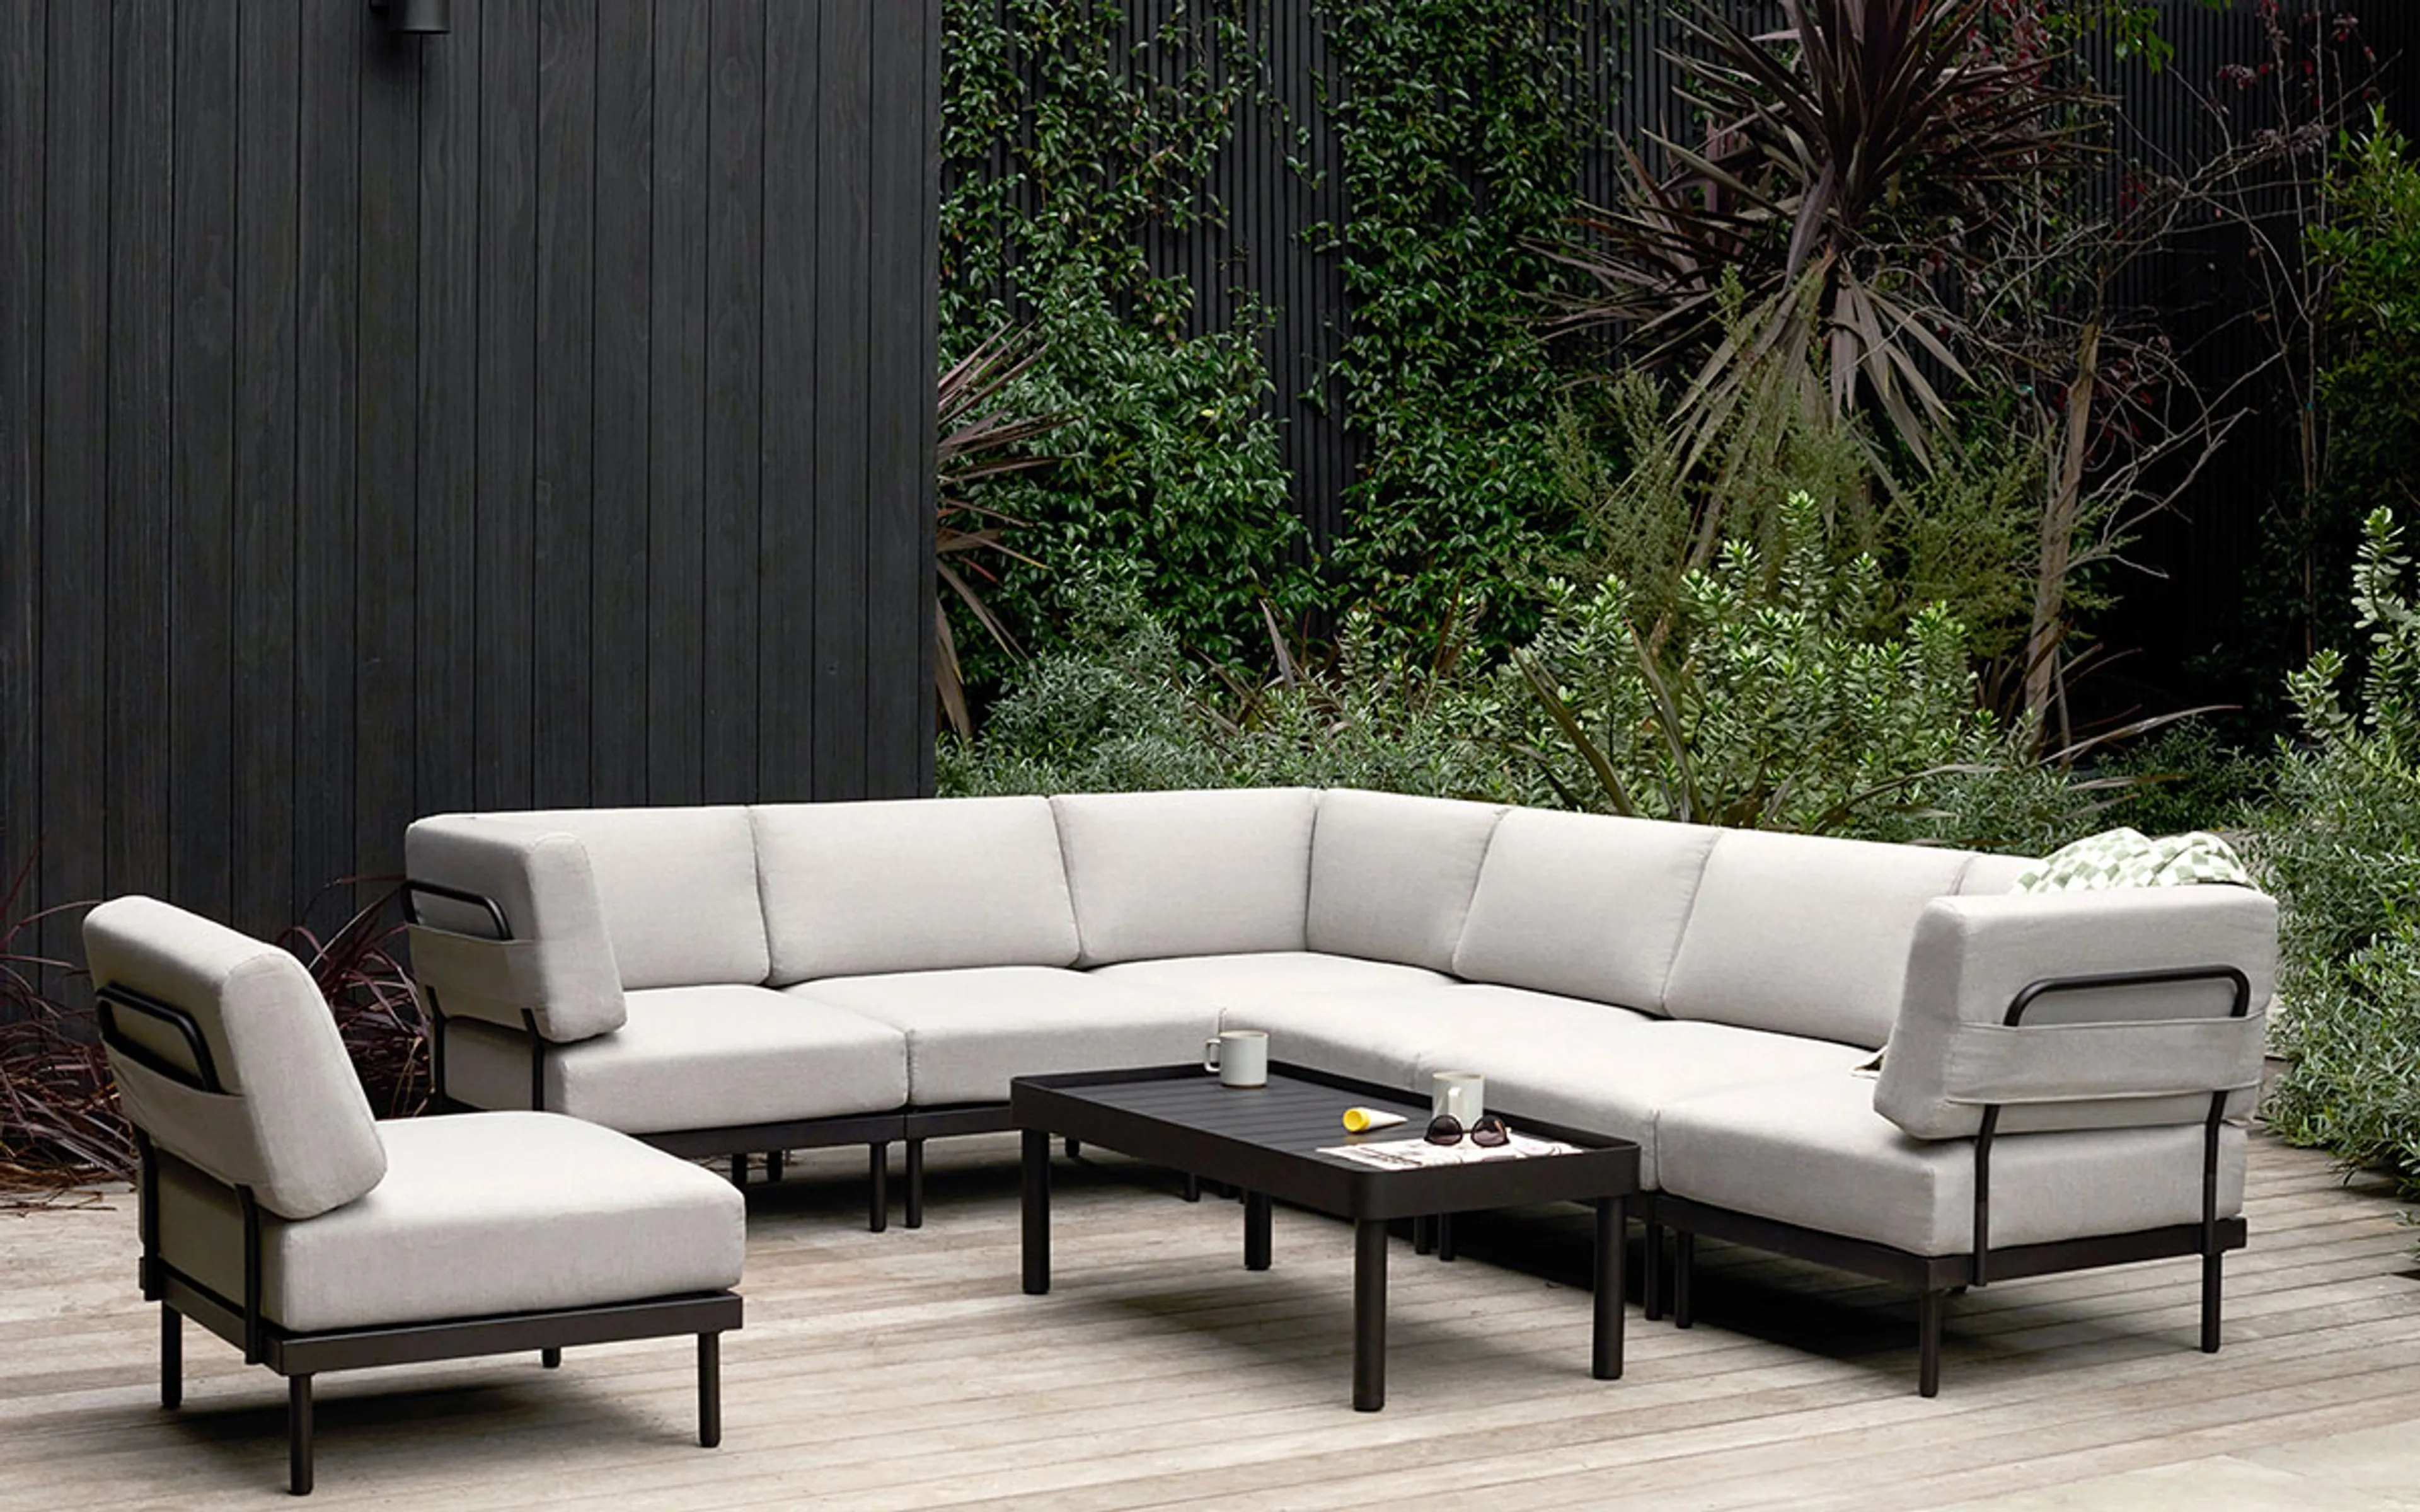 Relay Outdoor 4-Piece Sectional